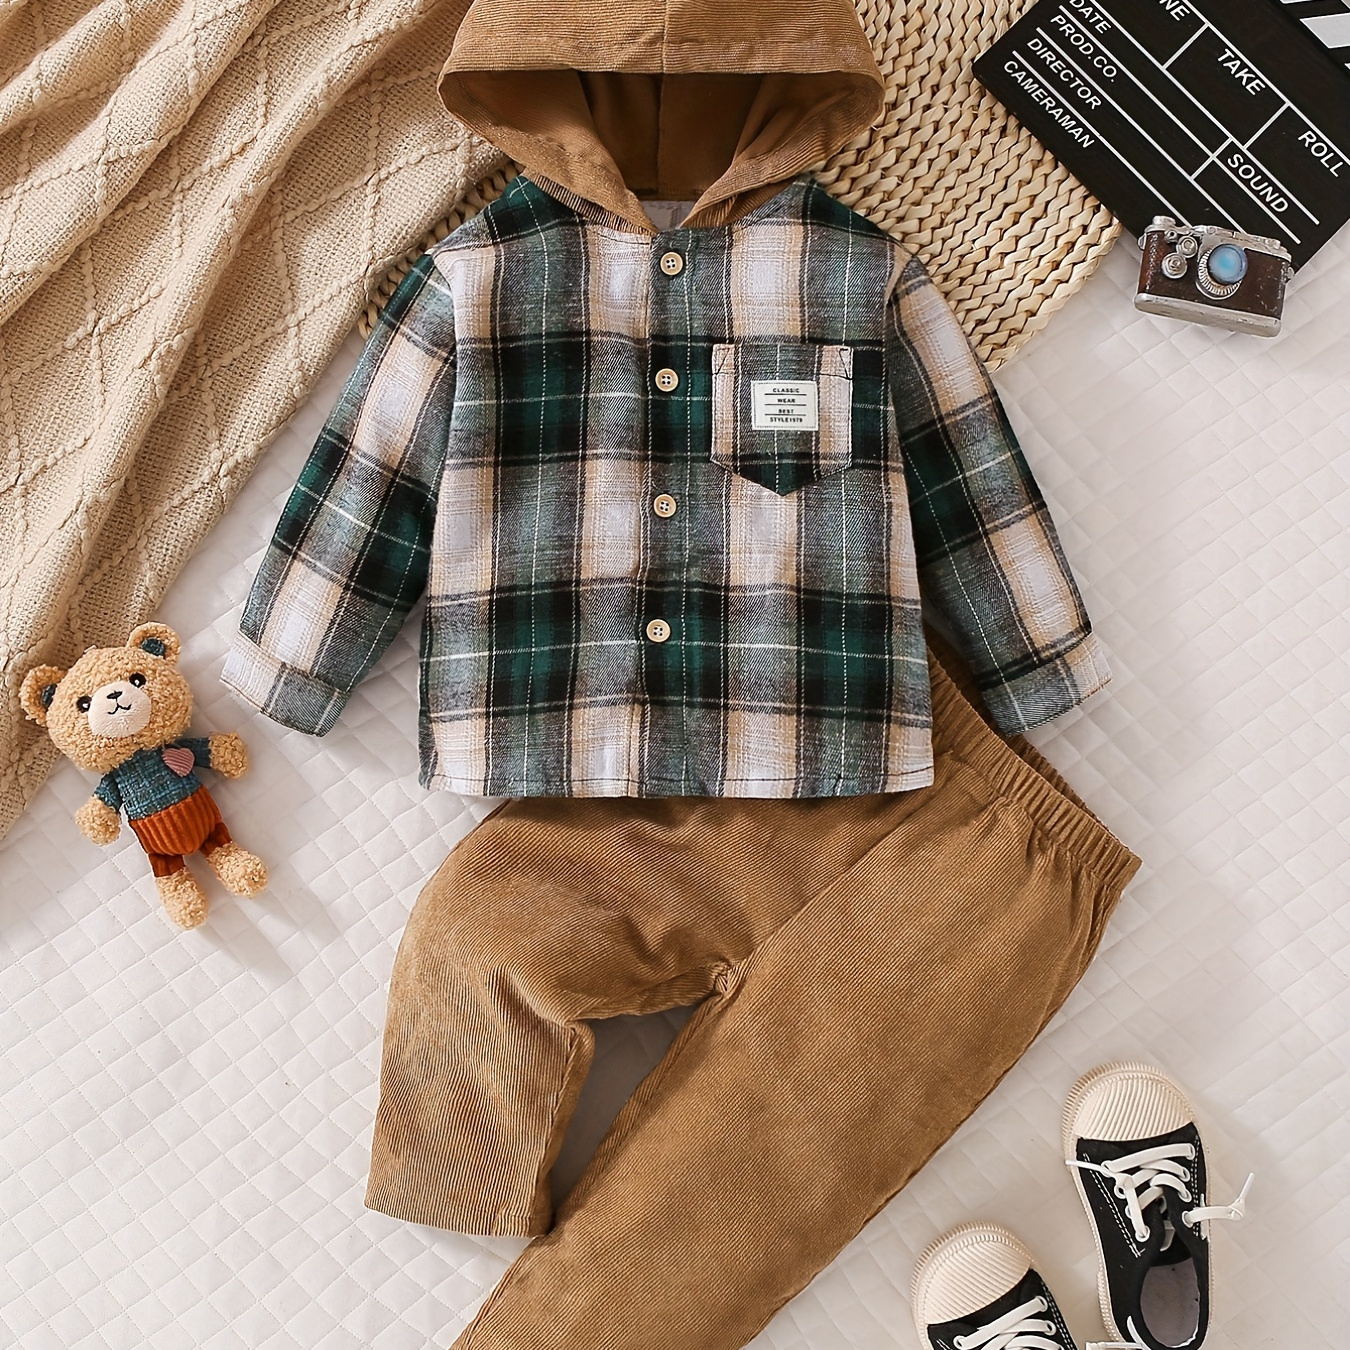 

Baby Boys Handsome Stylish Plaid Long Sleeve Hooded Shirt Pants Set, Kids Casual Outwear 2pcs Outfits